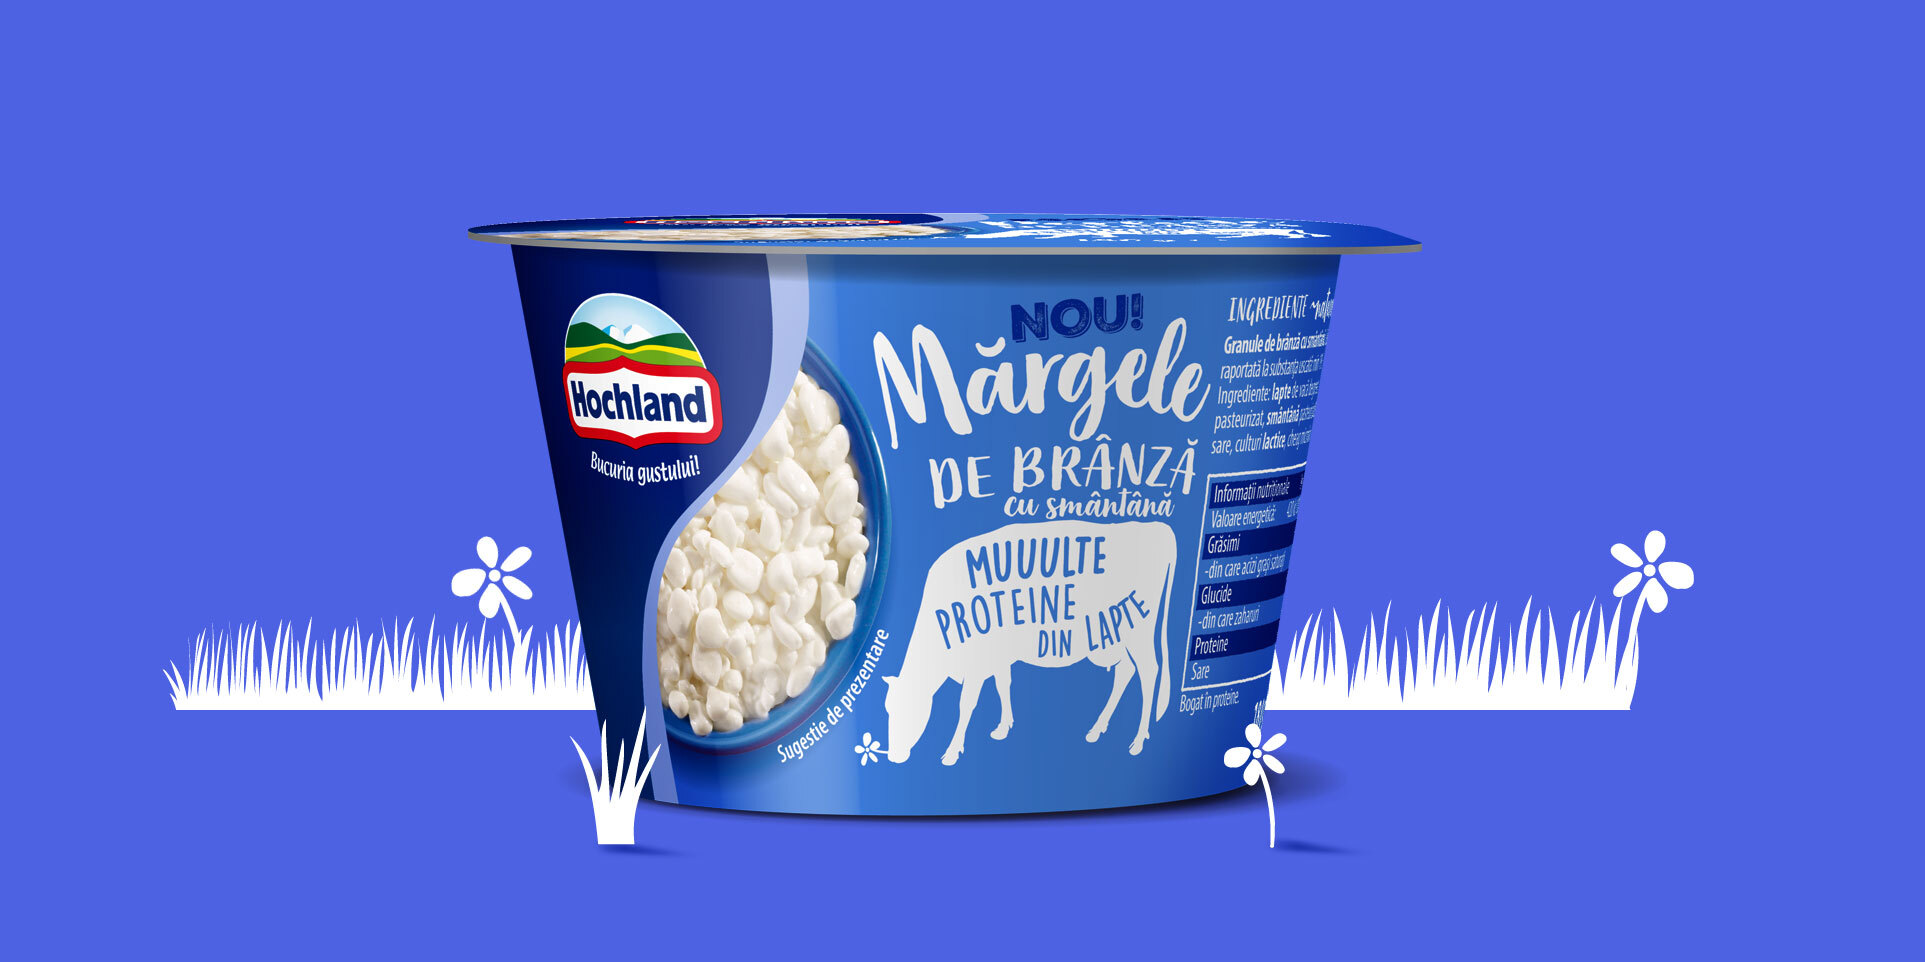 Cottage cheese packaging design for Hochland Margele de Branza line and brand's illustrations - grass with flowers.